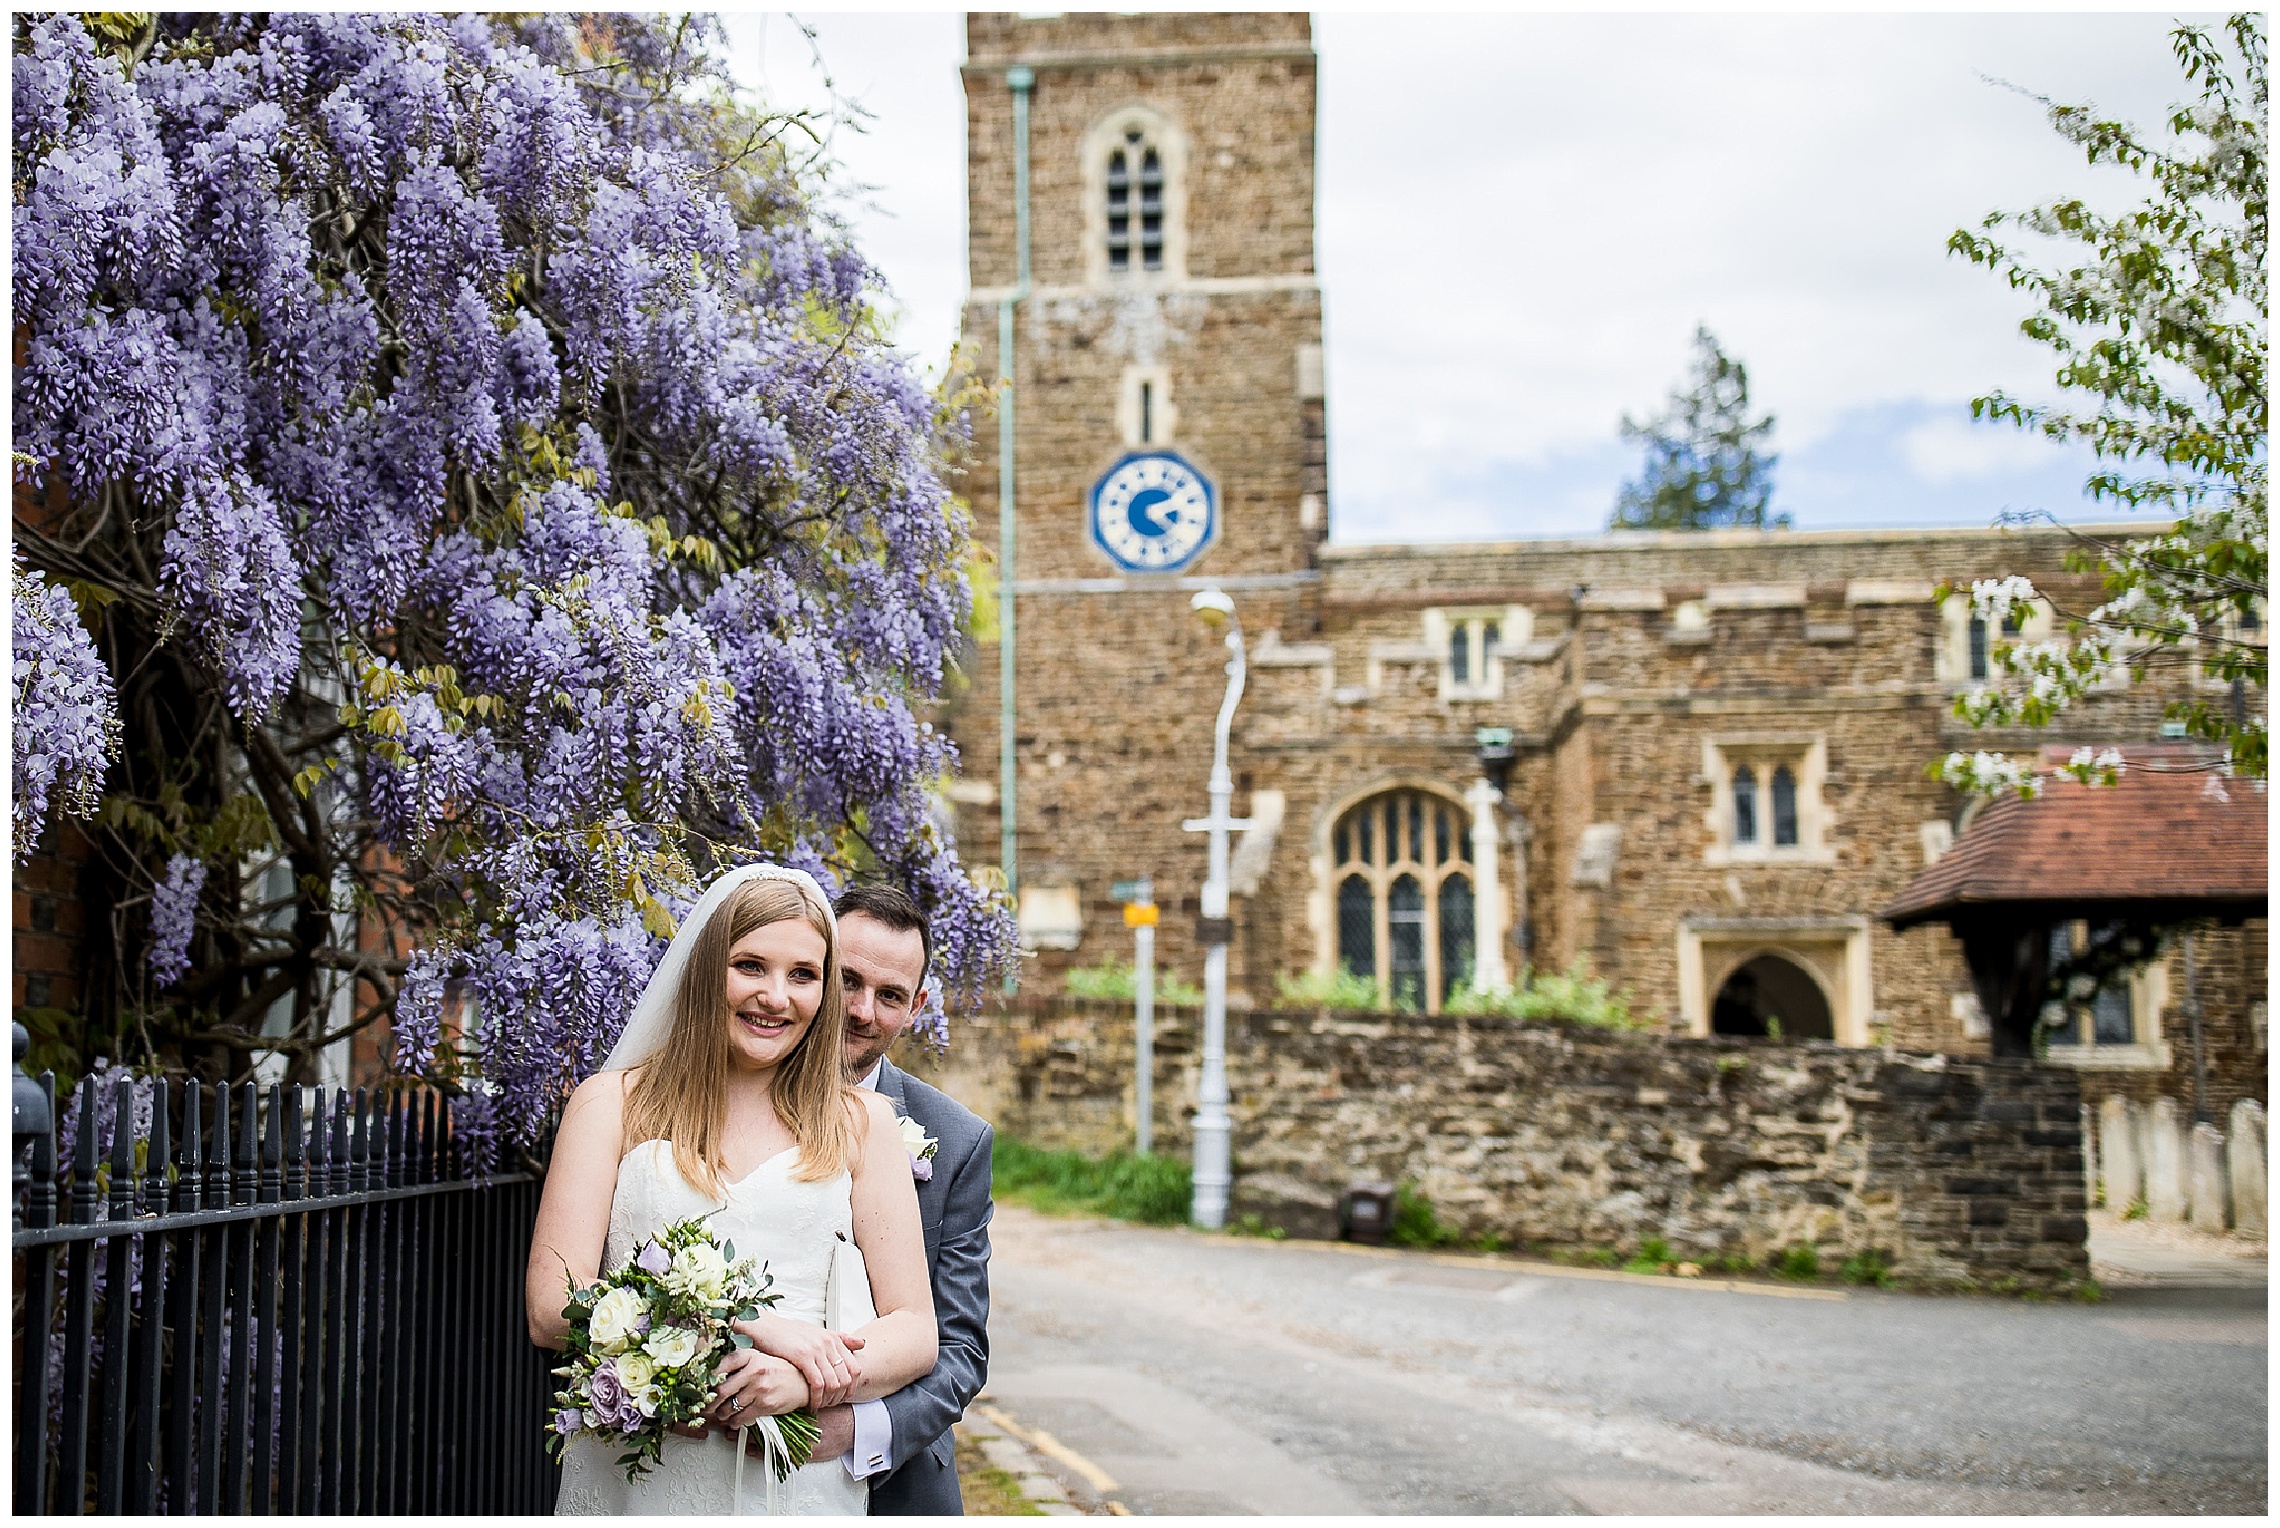 Bride and groom stand together in front of wisteria at Ampthill church